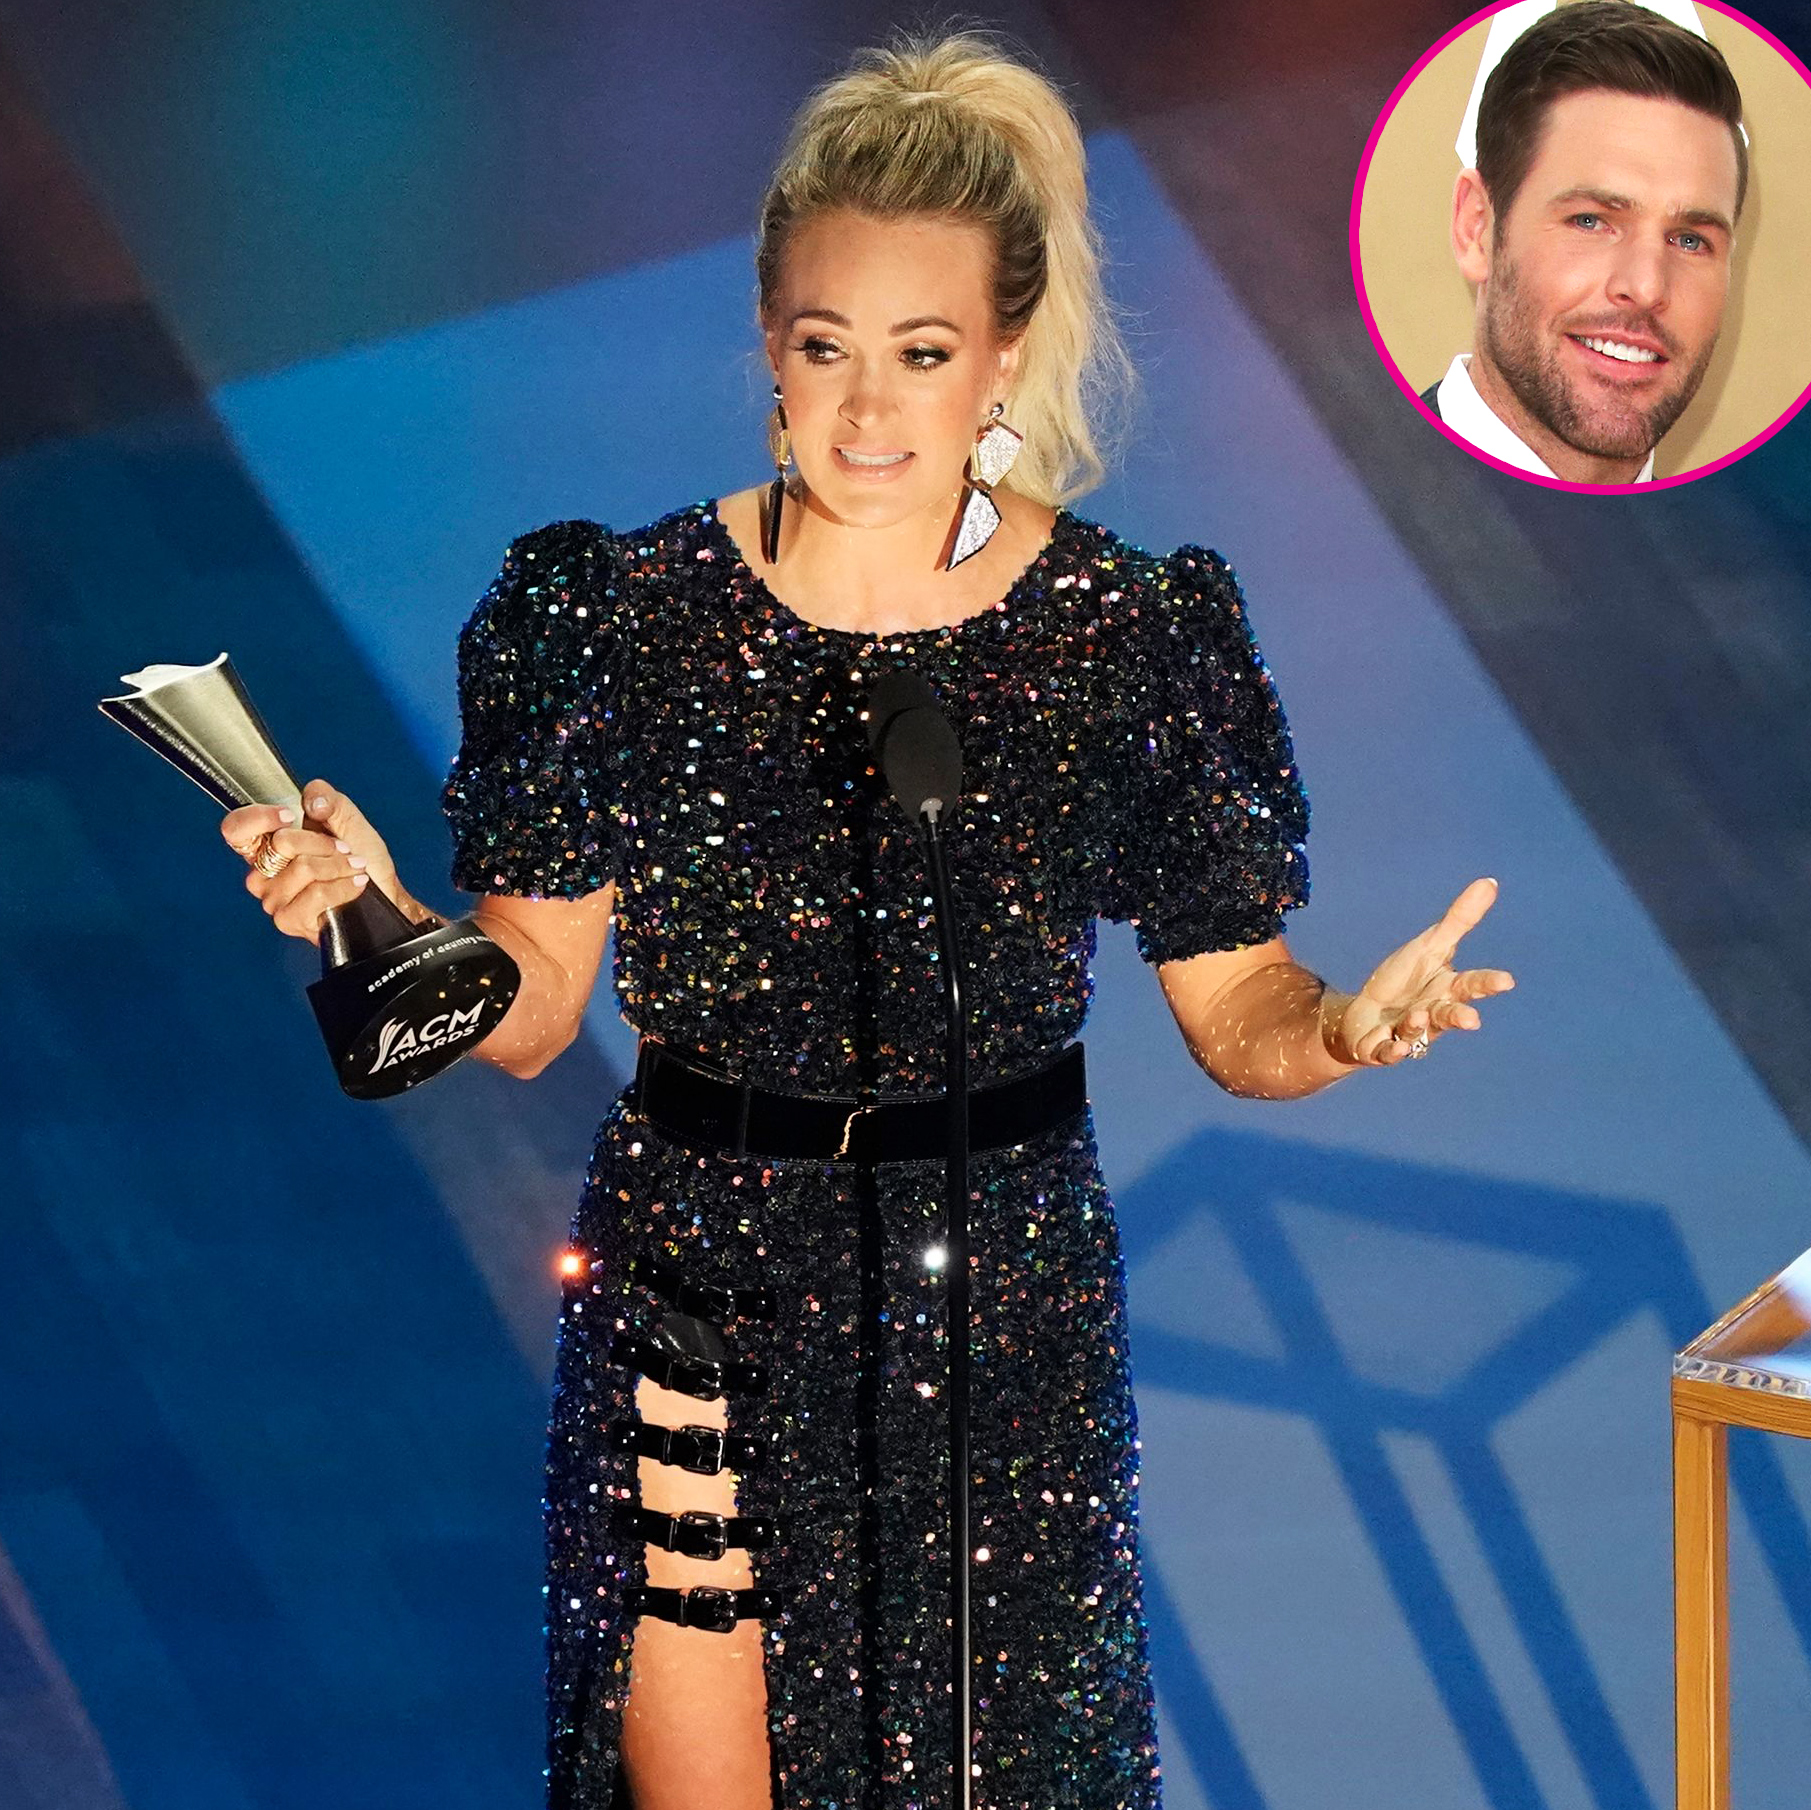 Carrie Underwood Interracial Fuck - Carrie Underwood Apologizes for Not Mentioning Mike Fisher at ACMs